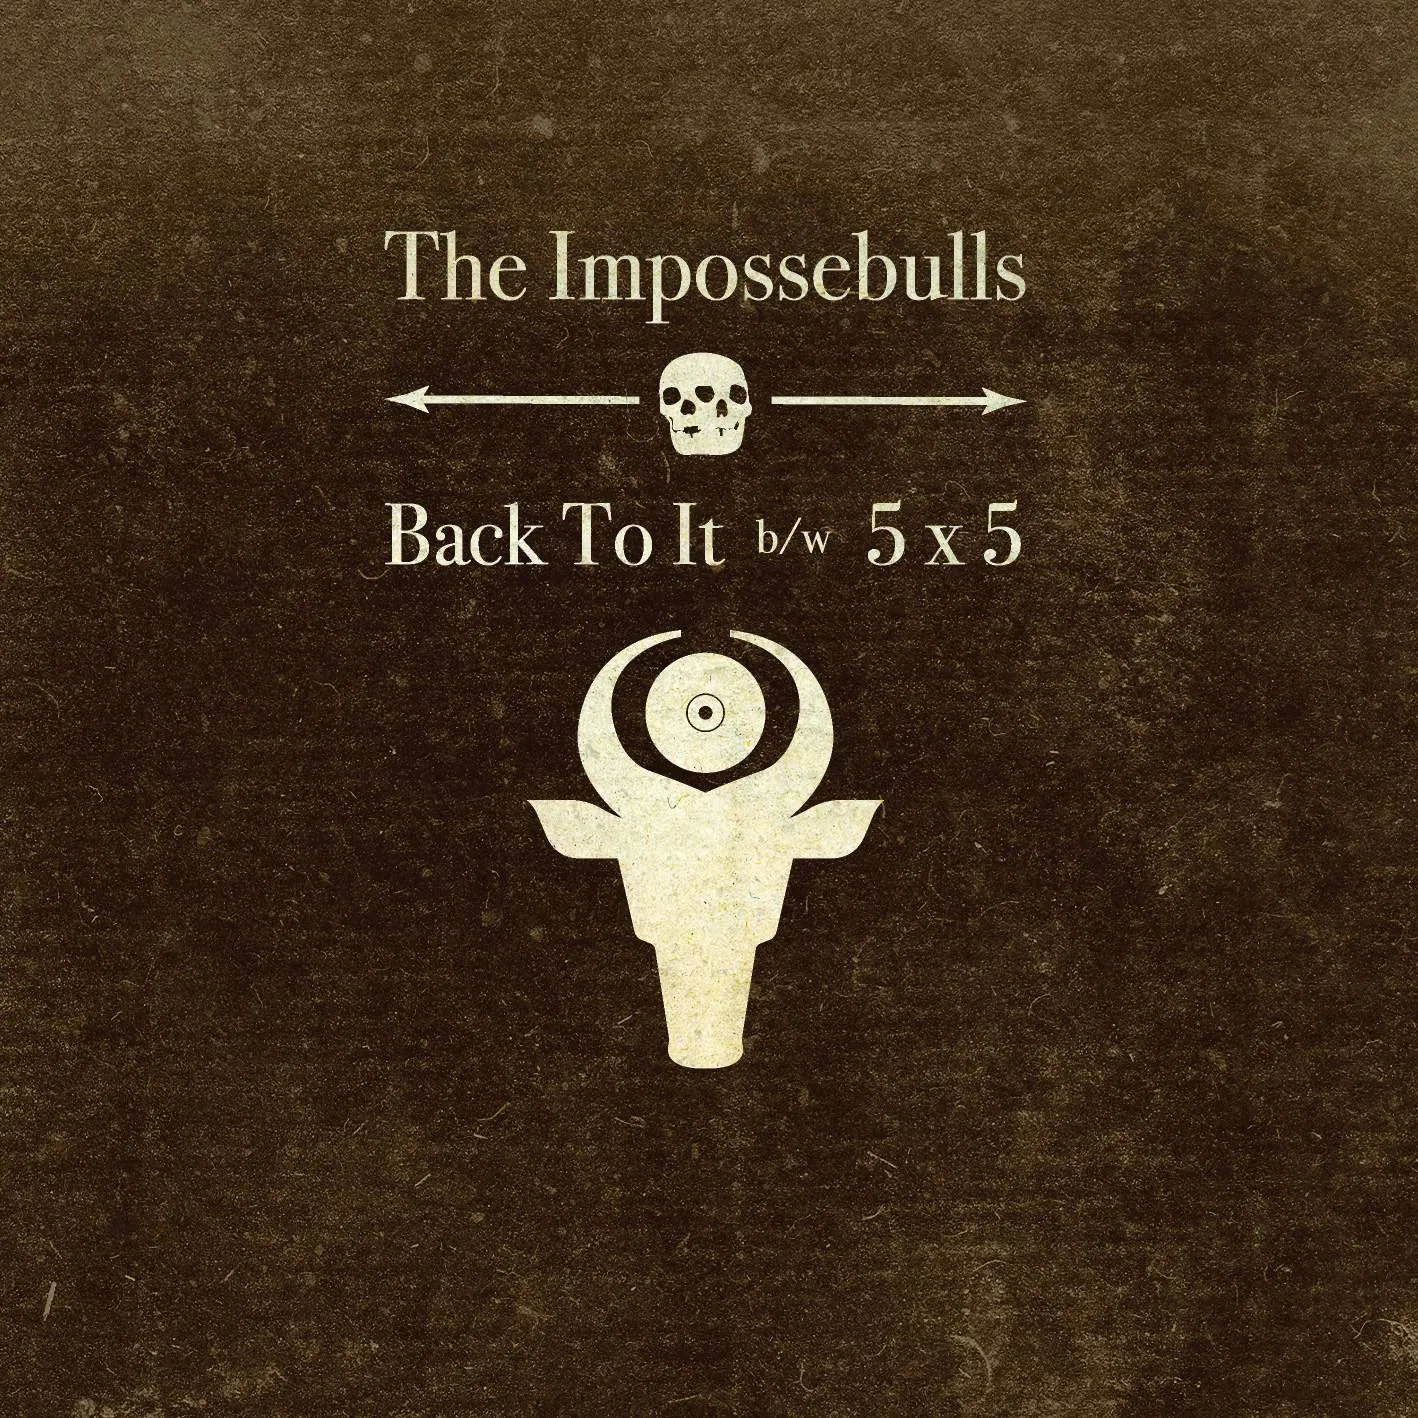 Album cover for “Back To It b/w 5 x 5” by The Impossebulls